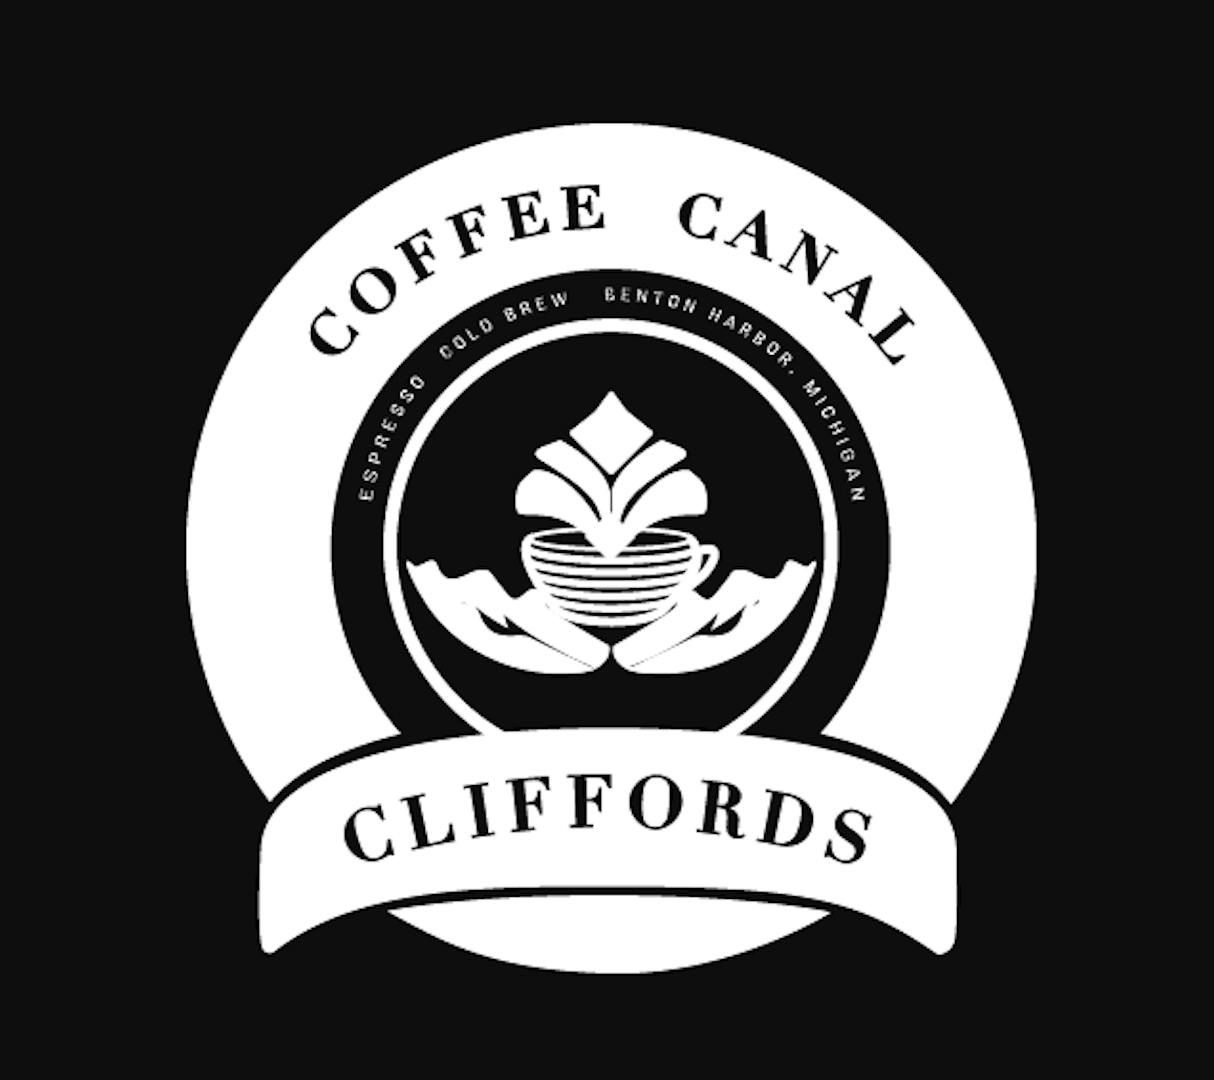 CLIFFORD'S COFFEE CANAL